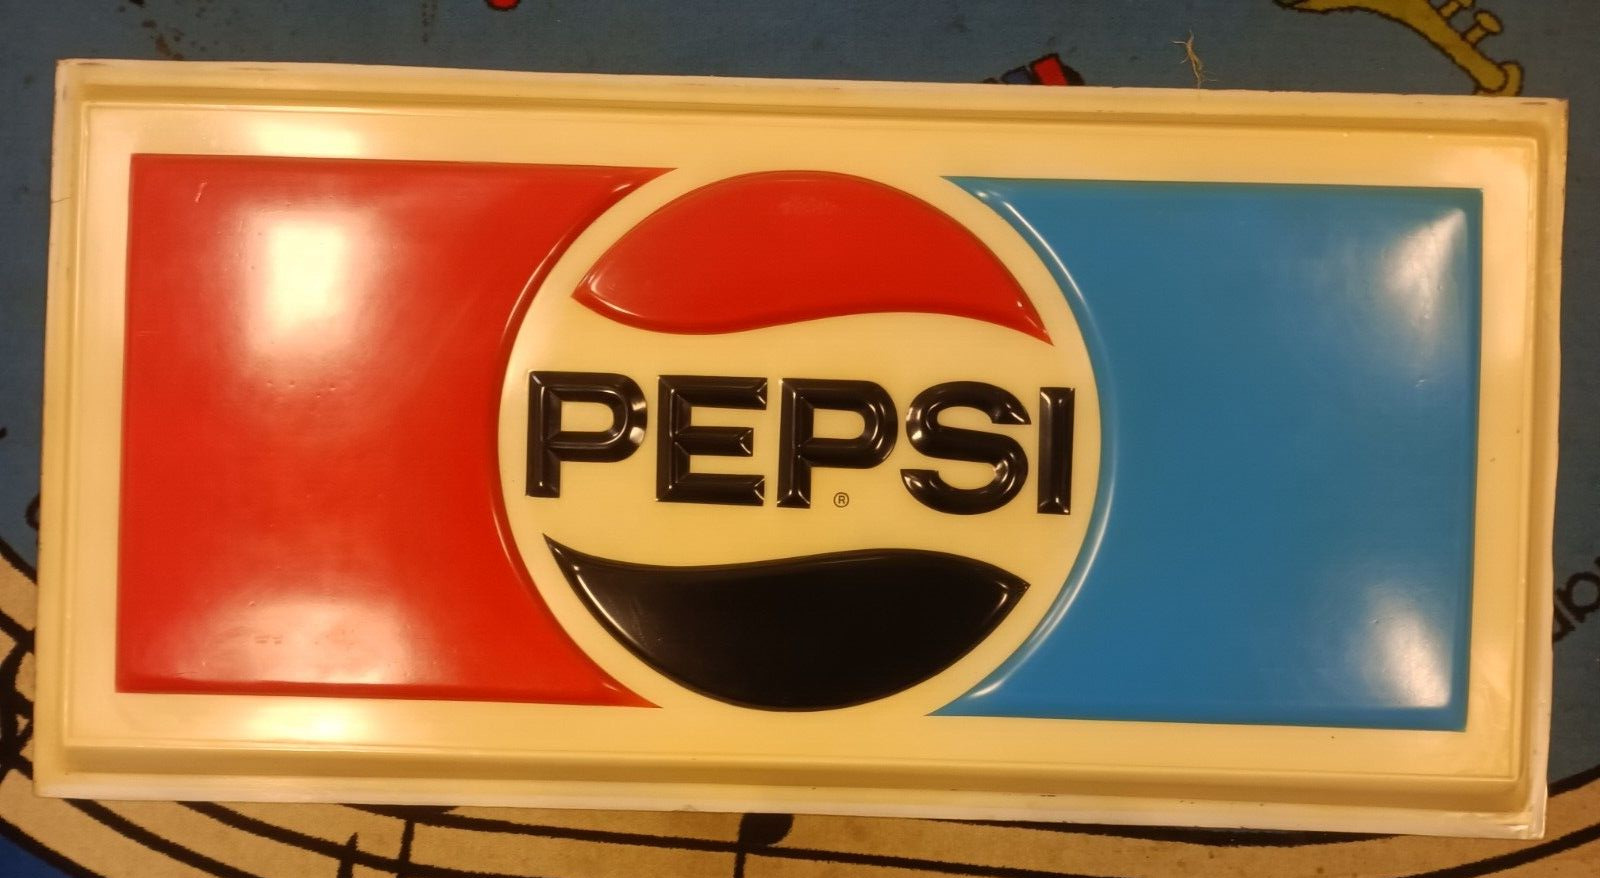 HUGE VTG PEPSI ACRYLIC EMBOSSED OUTDOOR SIGN 72 X 35 SODA COLA STORE ADVERTISING